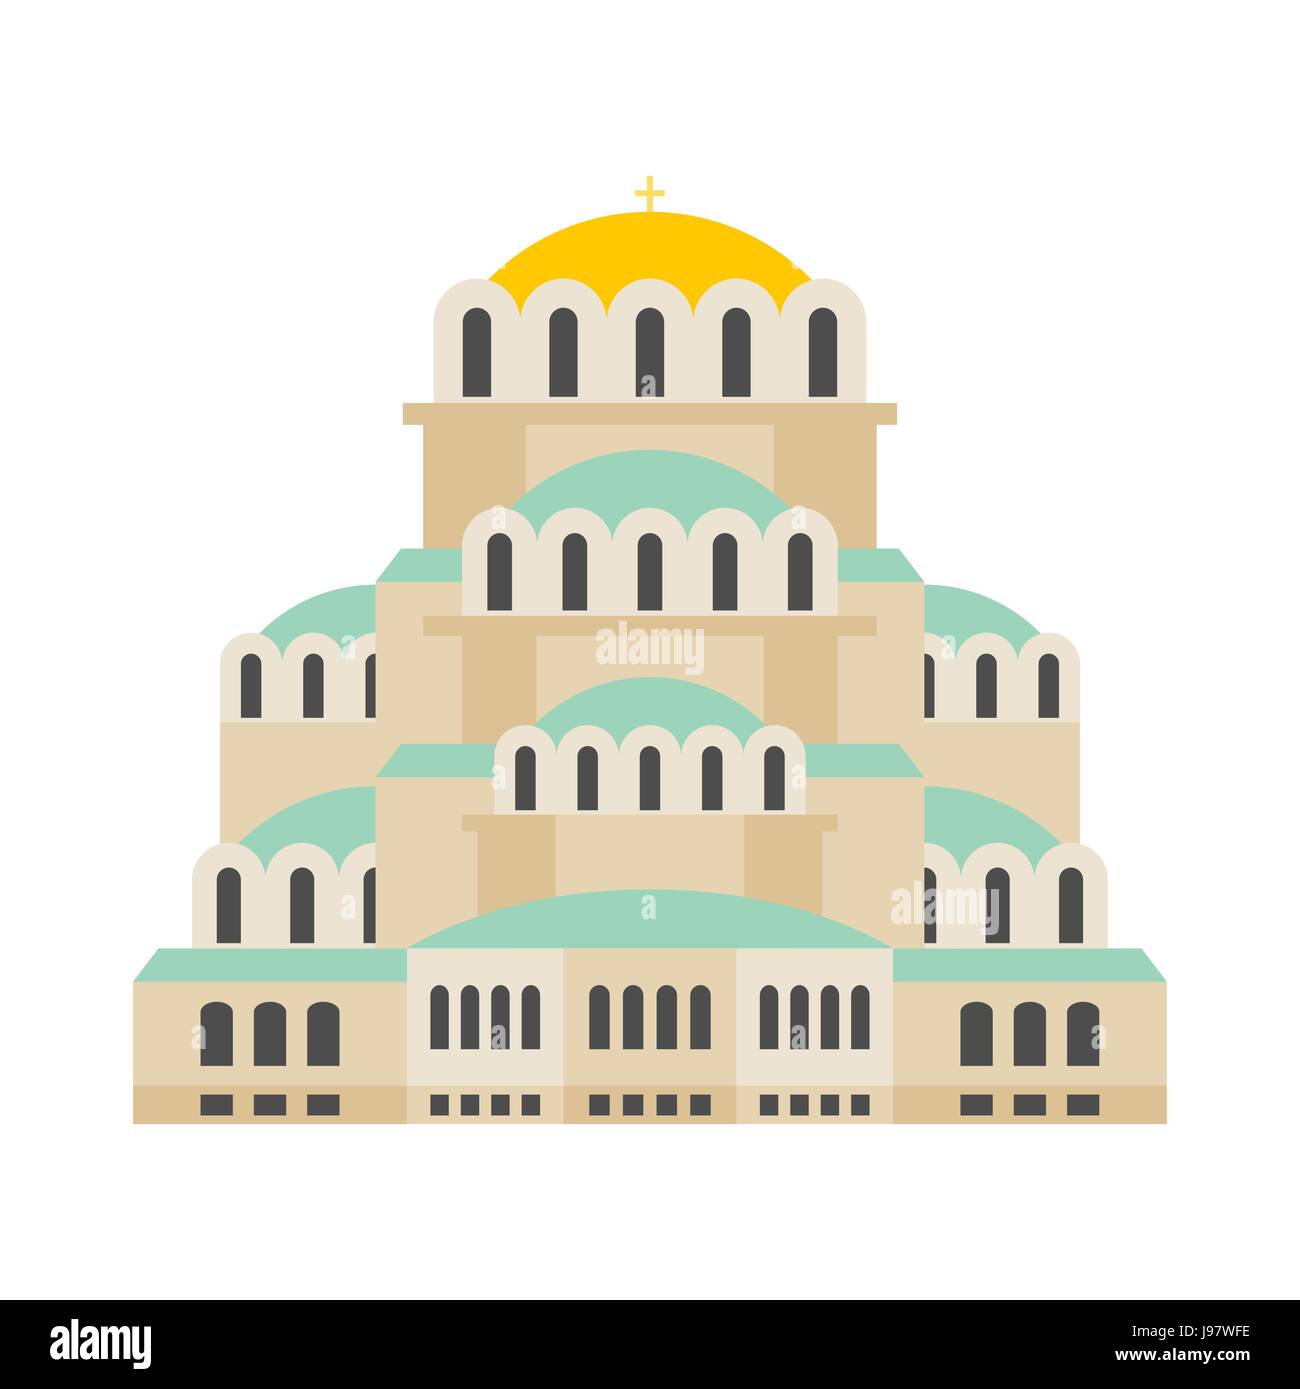 Church Of St. Alexander Nevsky. Patriarchal Cathedral Cathedral Bulgarian Orthodox Church. It is located in Sofia, Bulgaria. landmark Bulgaria Stock Vector